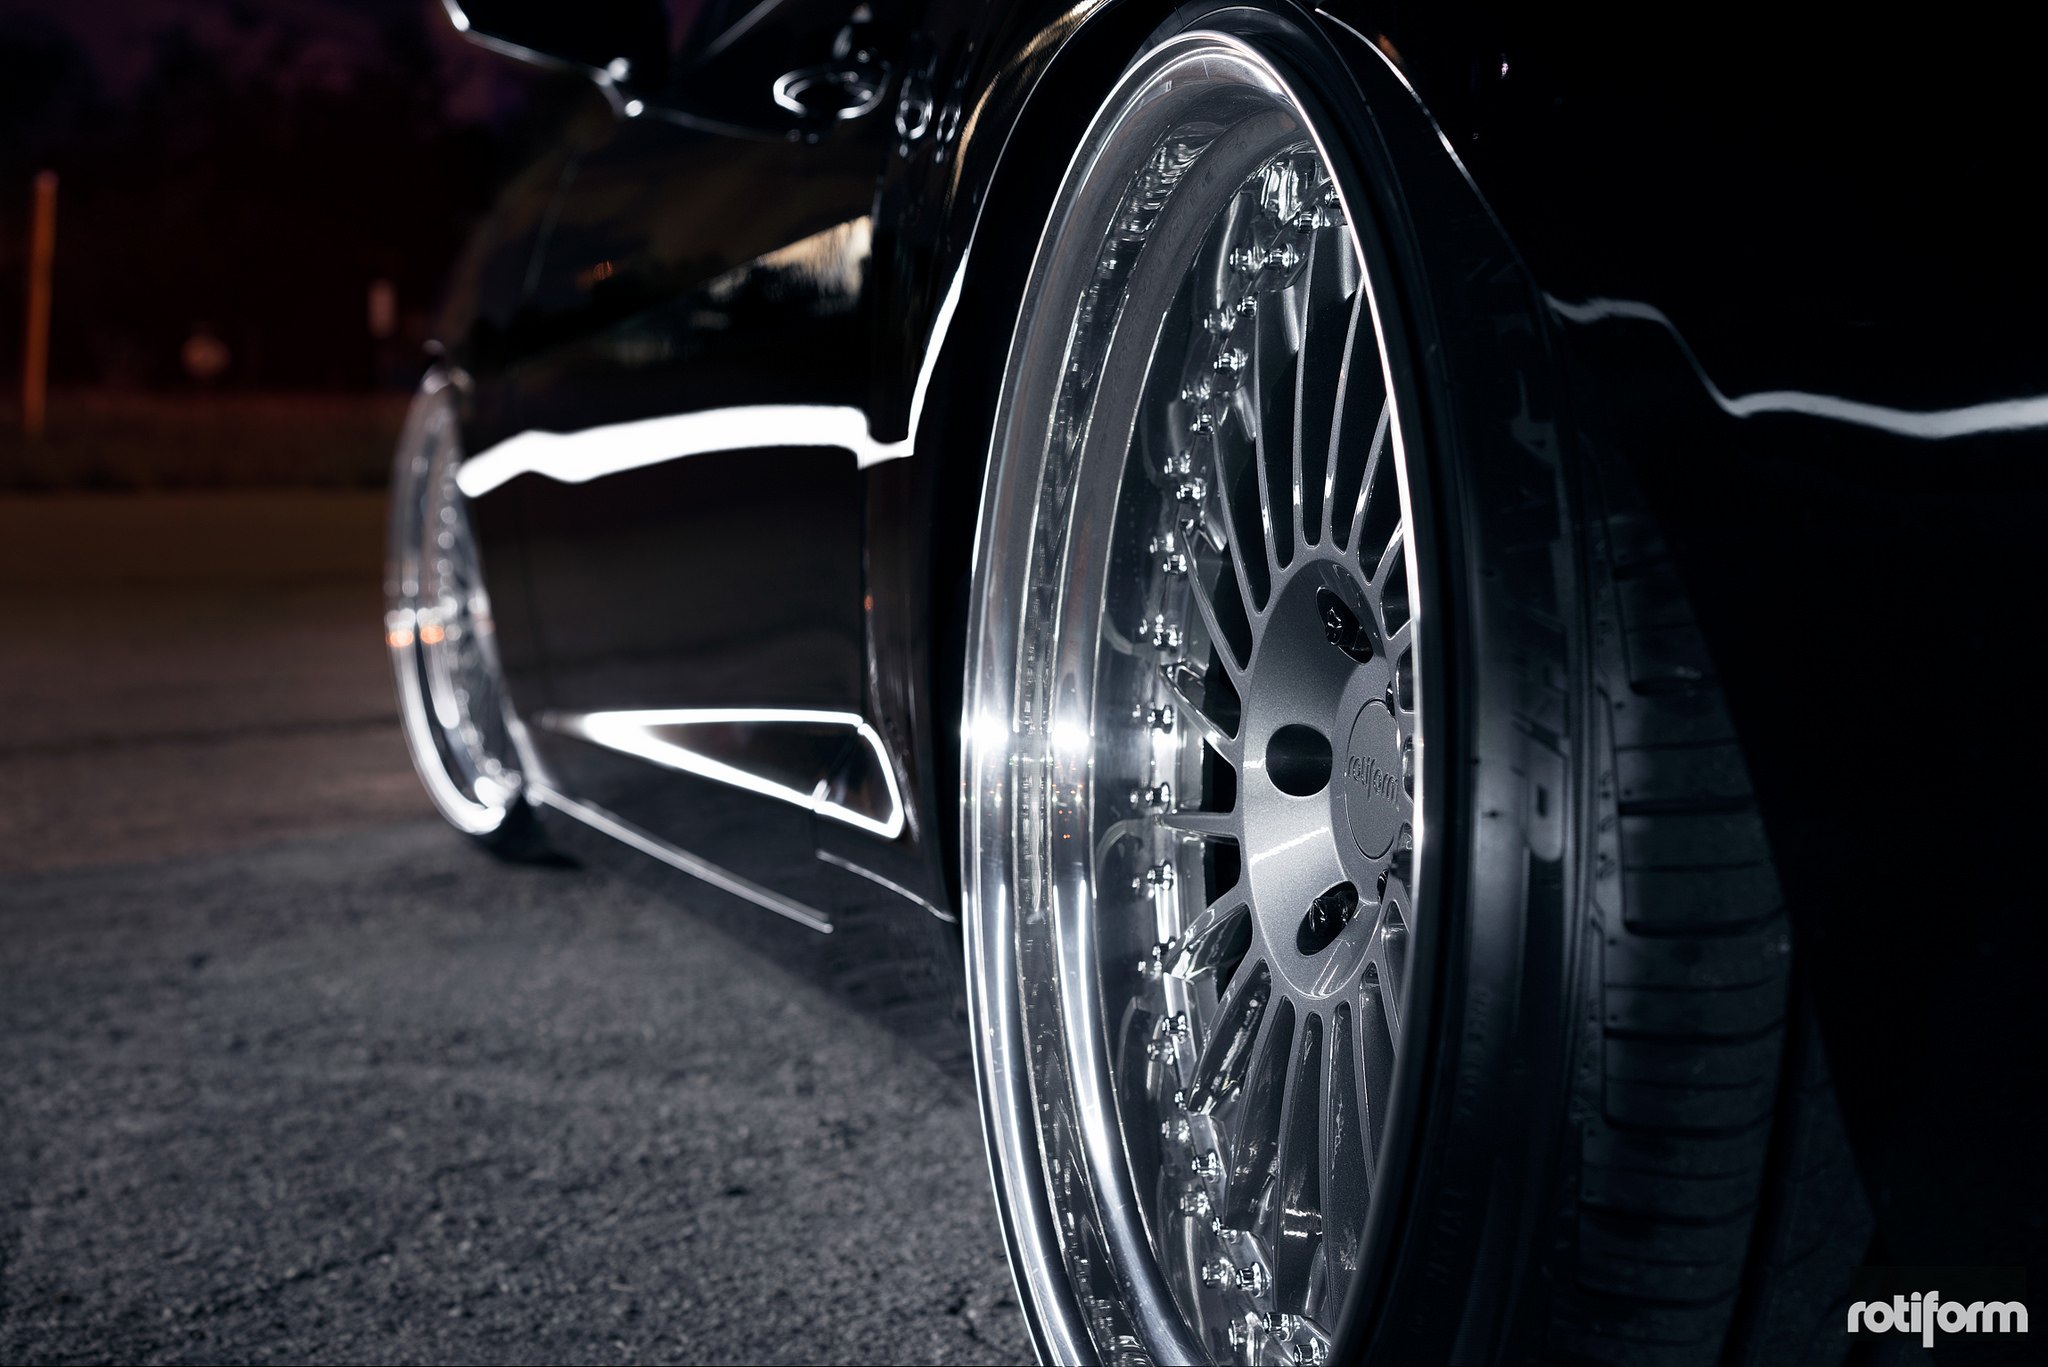 Rtiform Rims With mirror Polished Lips - Photo by Rotiform